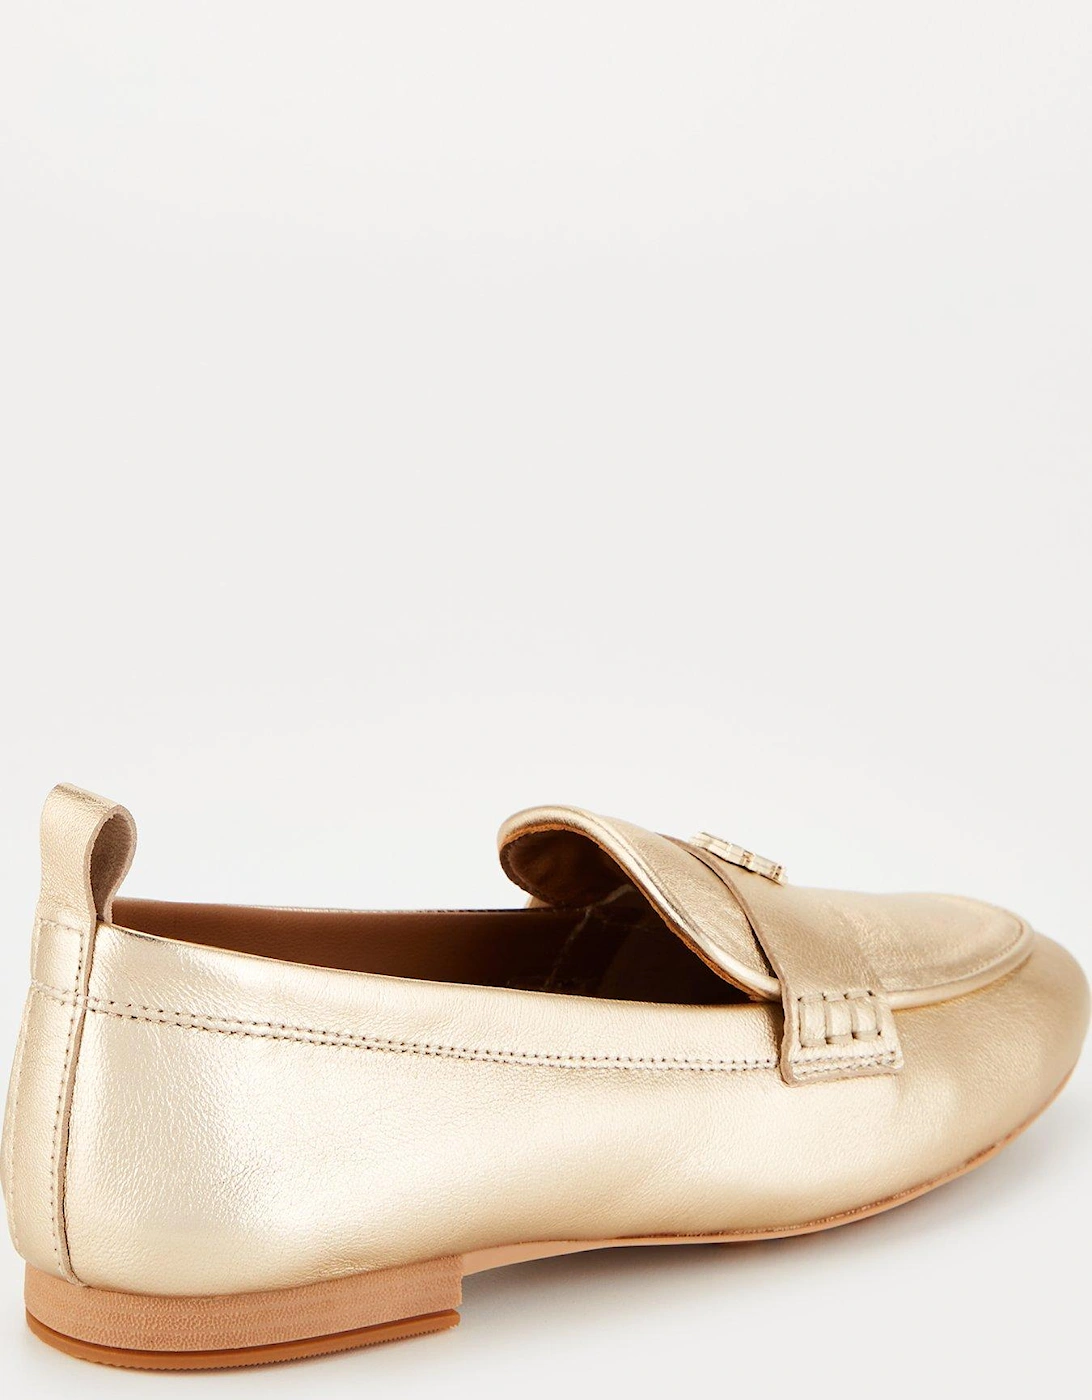 Leather Loafers - Beige